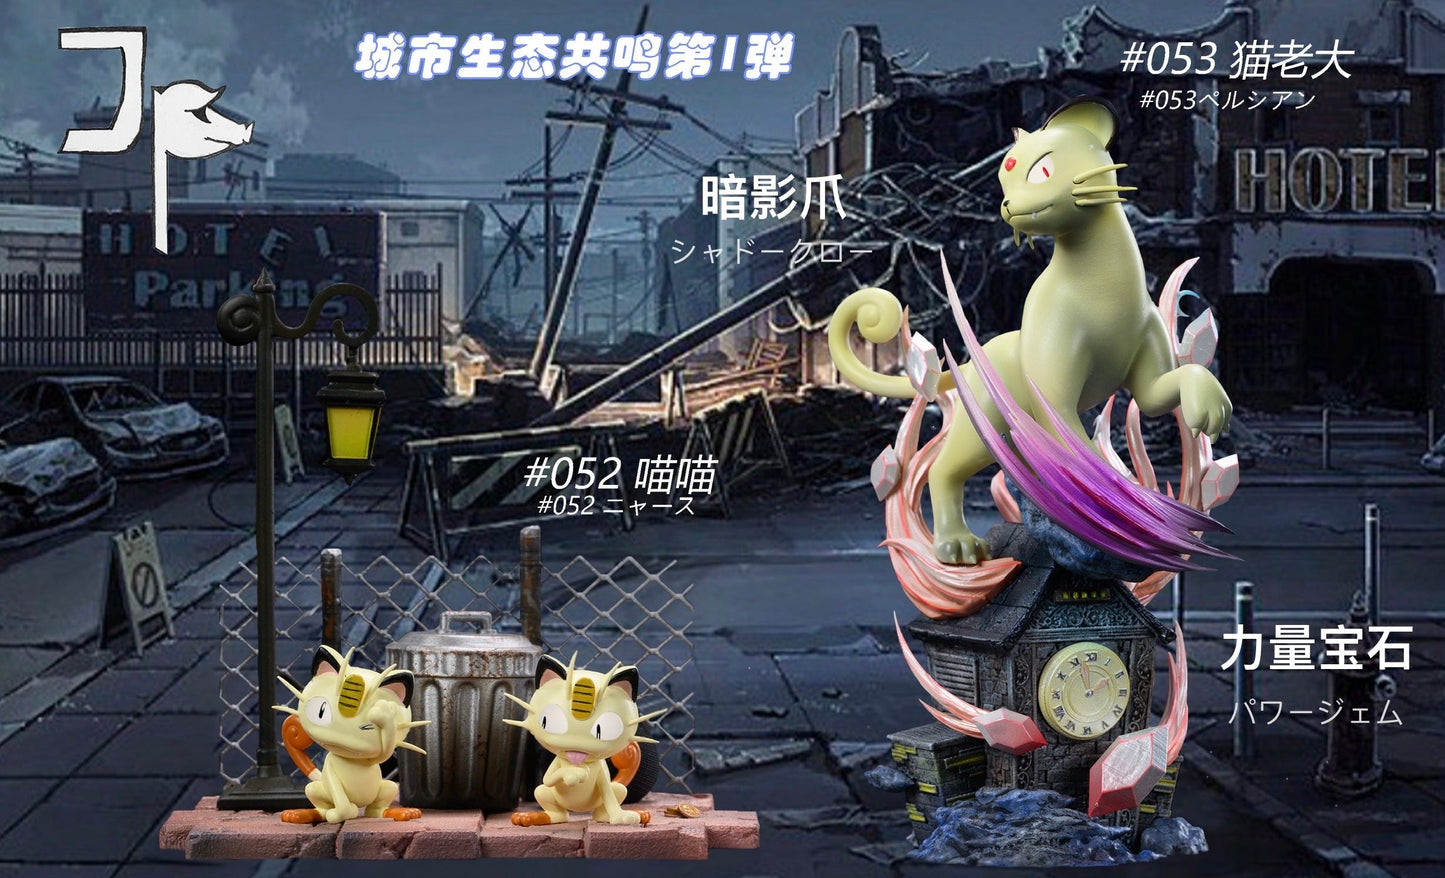 [PREORDER CLOSED] Statue [JP] - Meowth & Persian